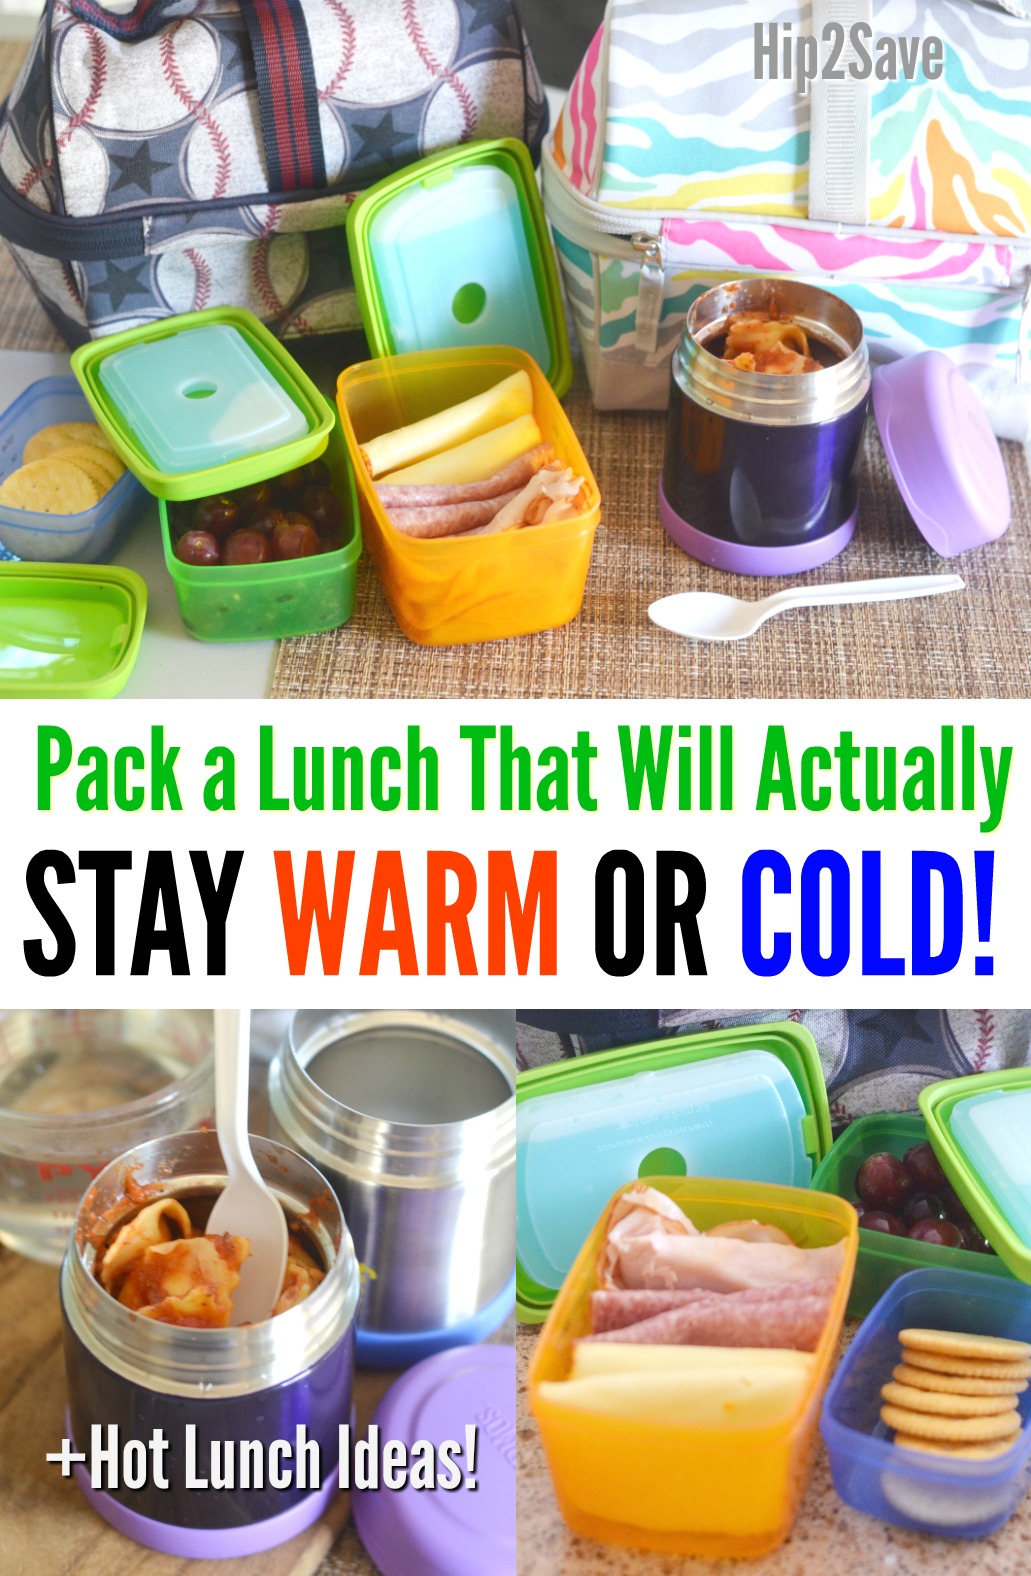 https://hip2save.com/wp-content/uploads/2016/08/pack-a-lunch-that-will-actually-stay-hot-or-cold-by-hip2save-com.jpg